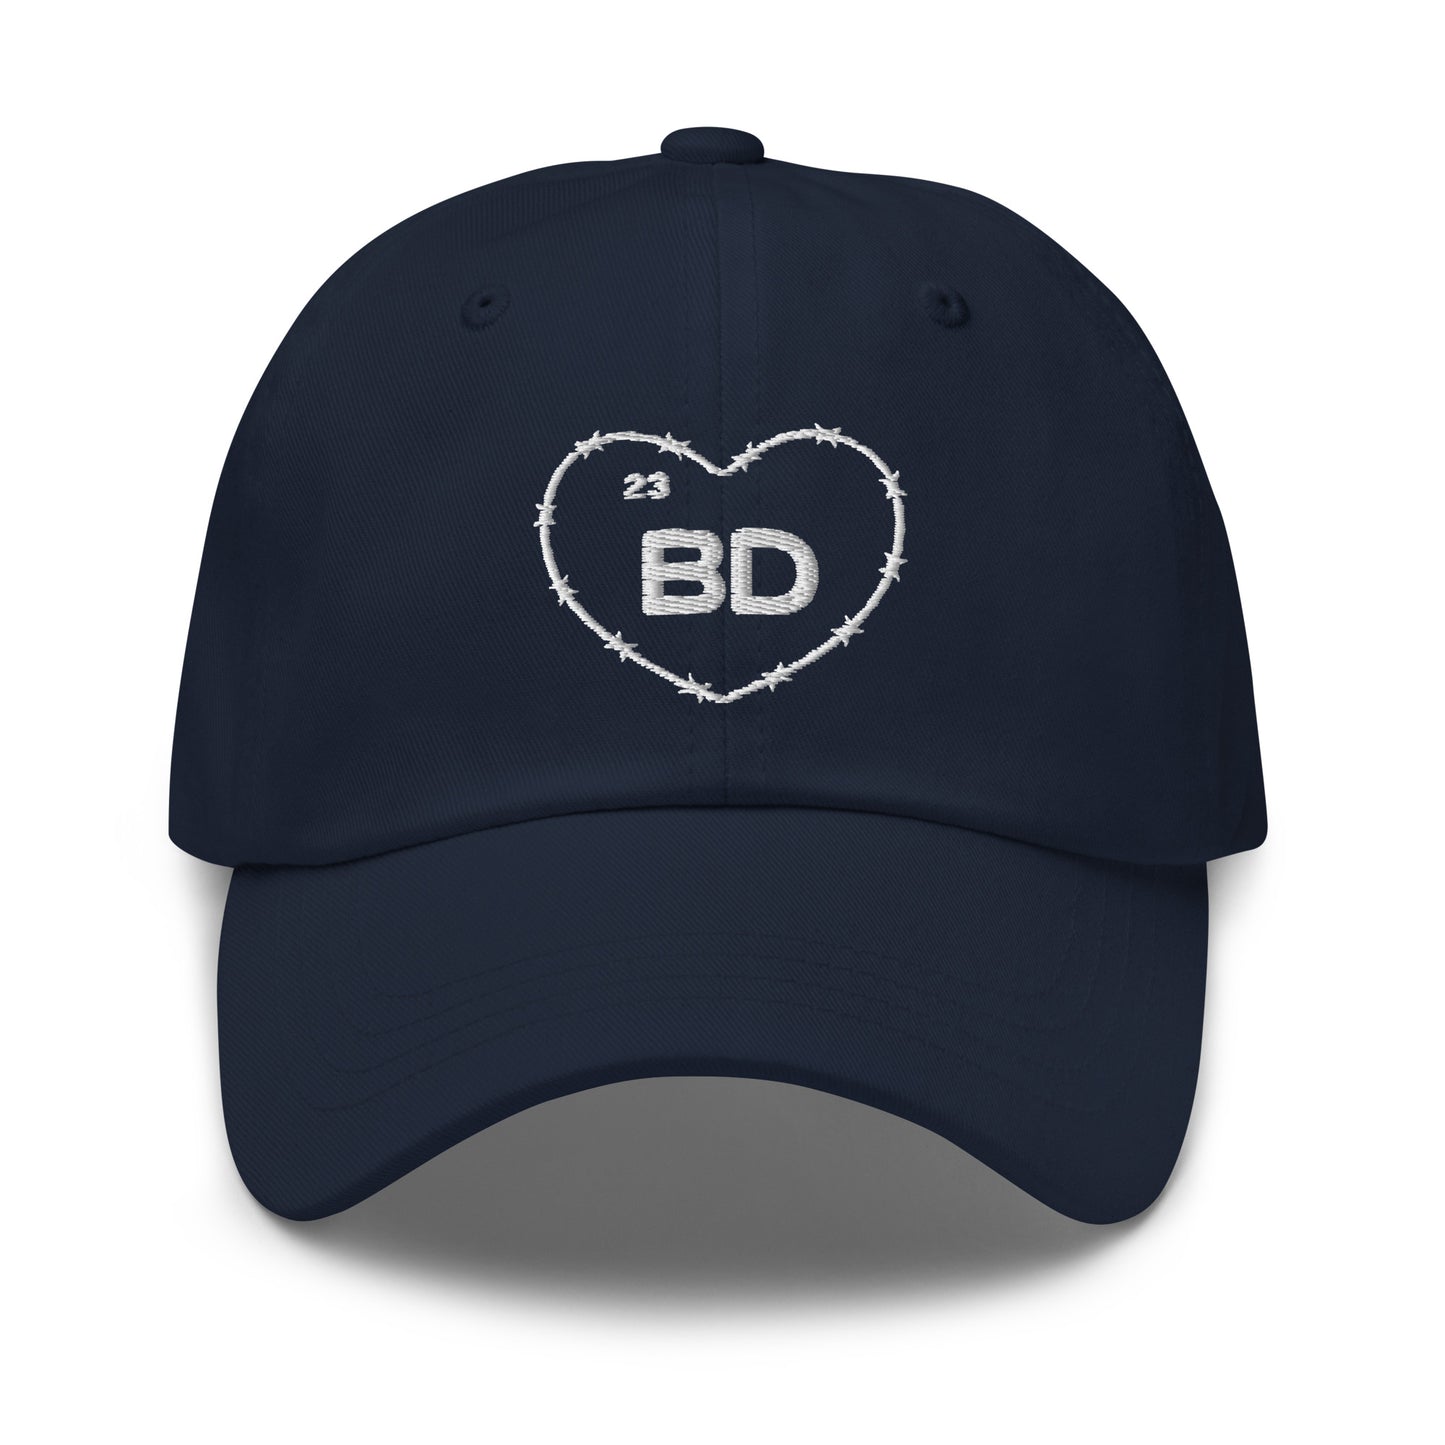 Blame Daddy Barbed Heart Cap